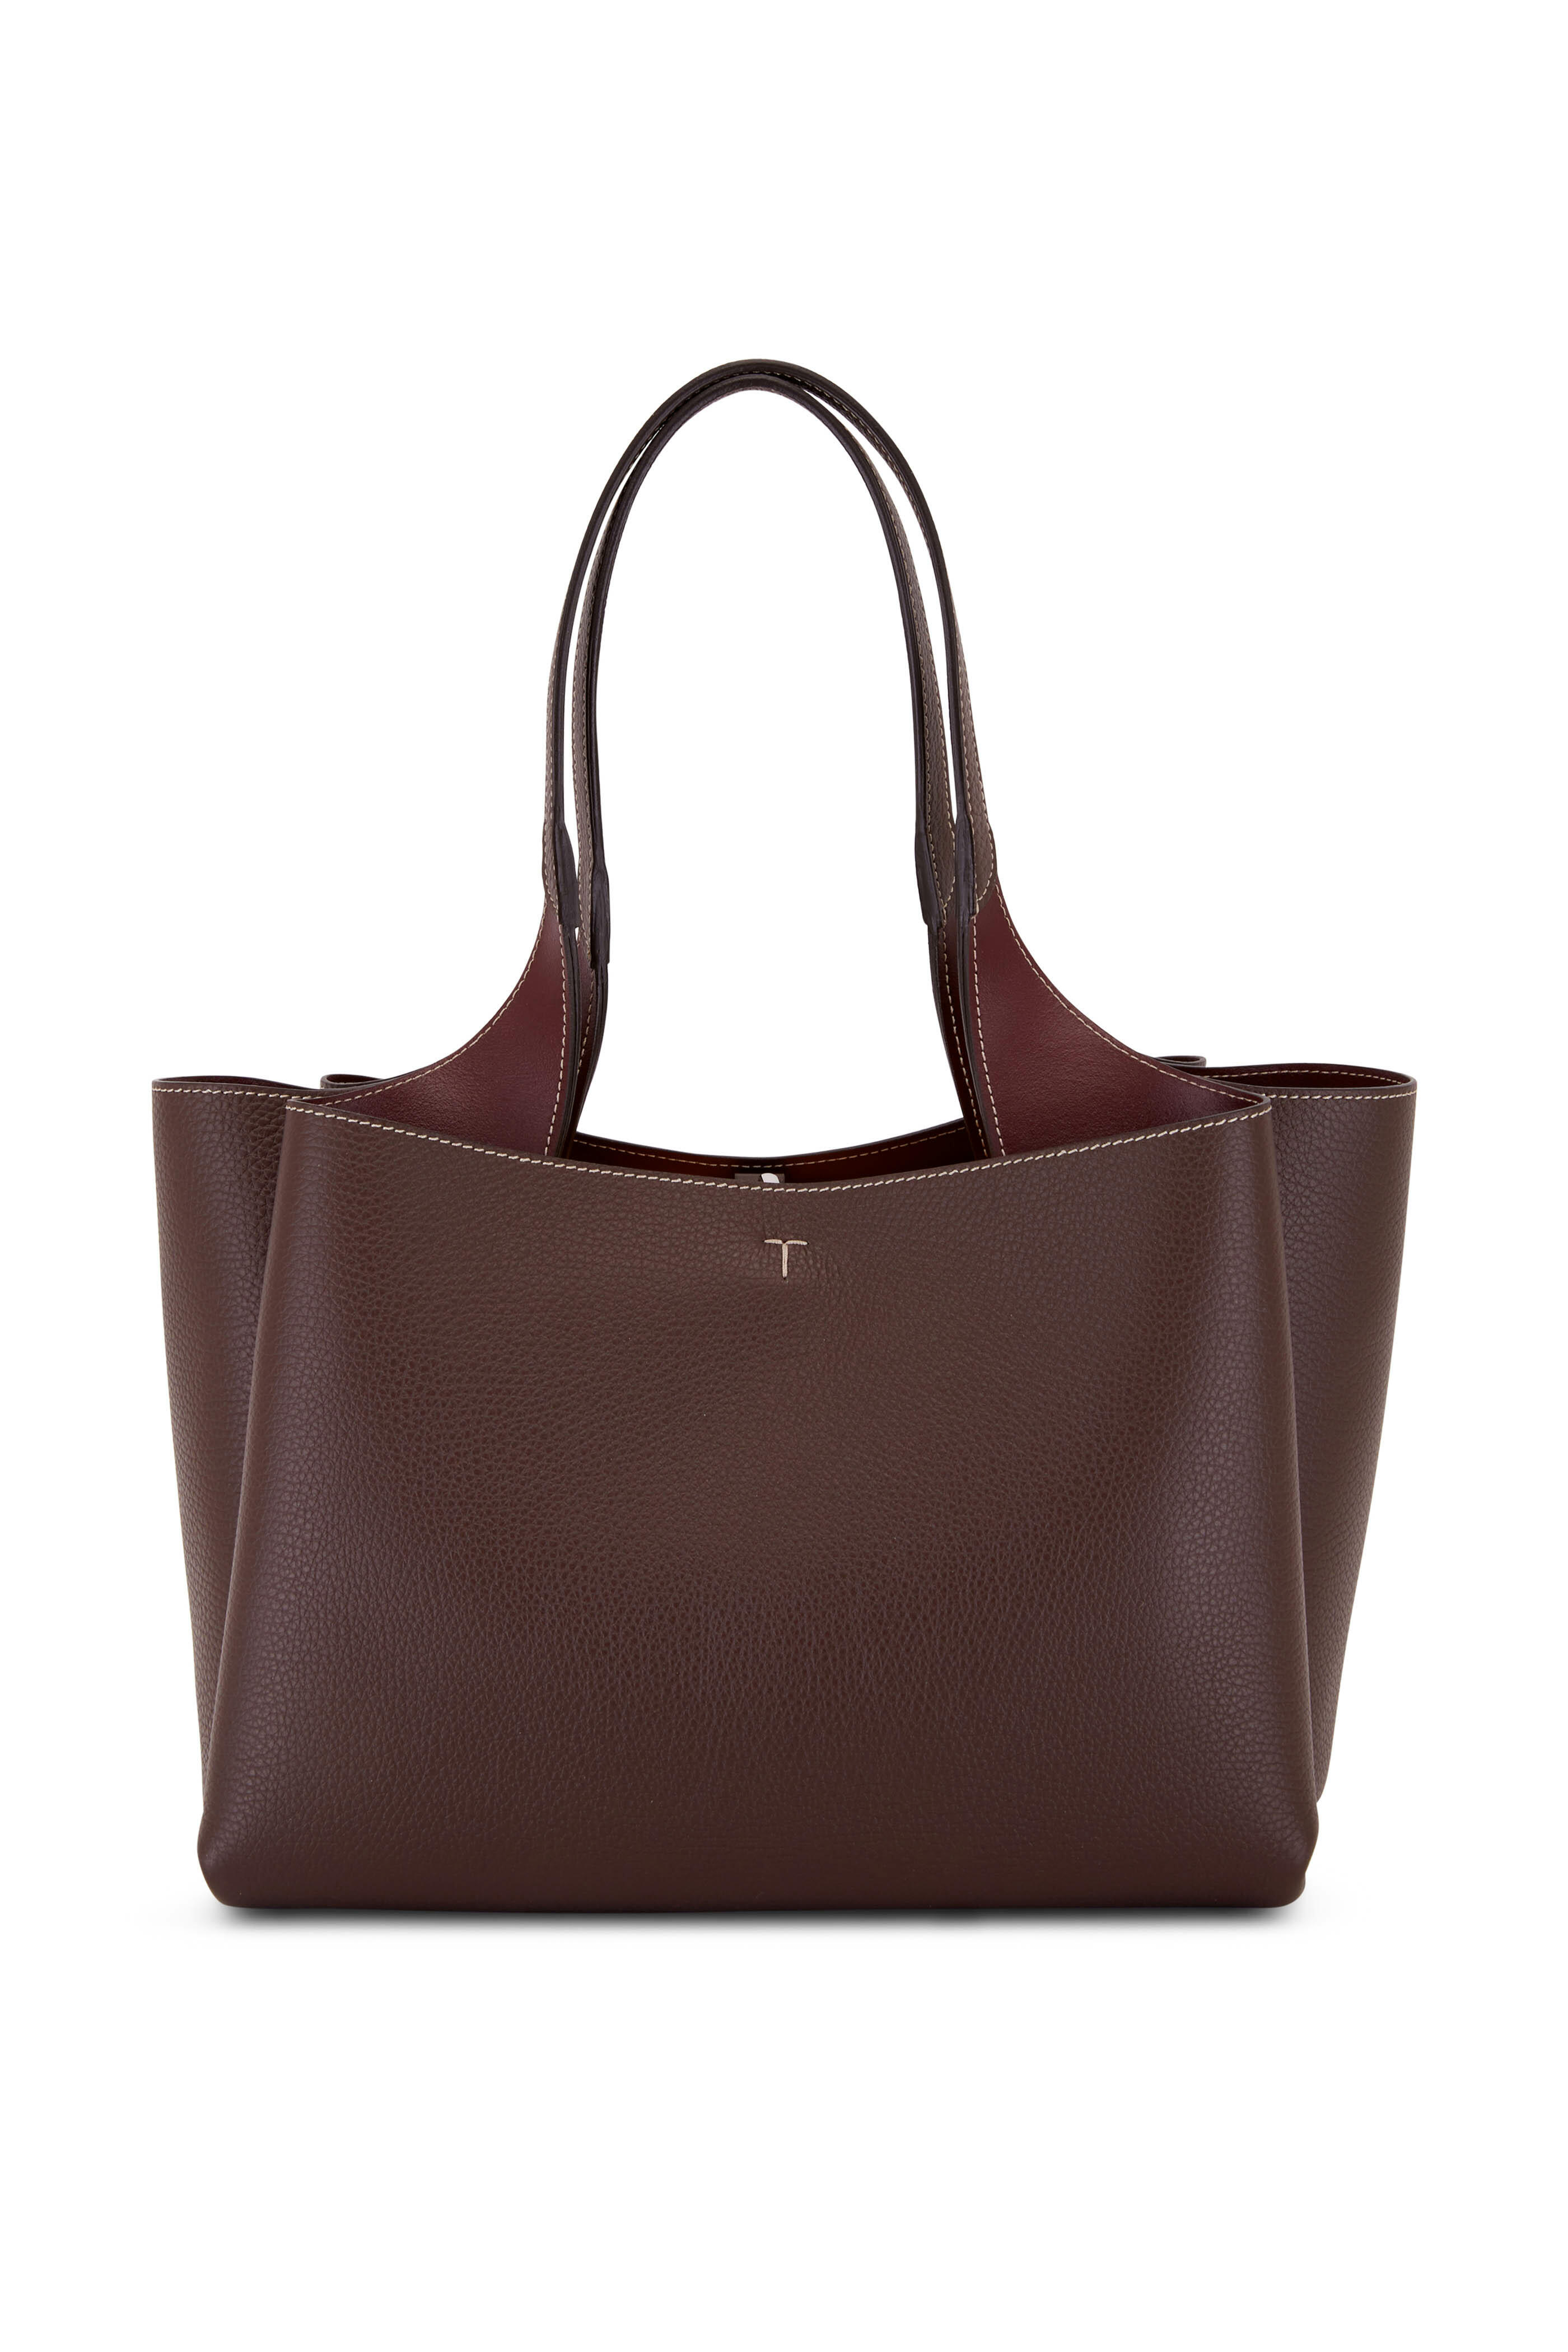 Apa Medium Leather Tote Bag in White - Tods